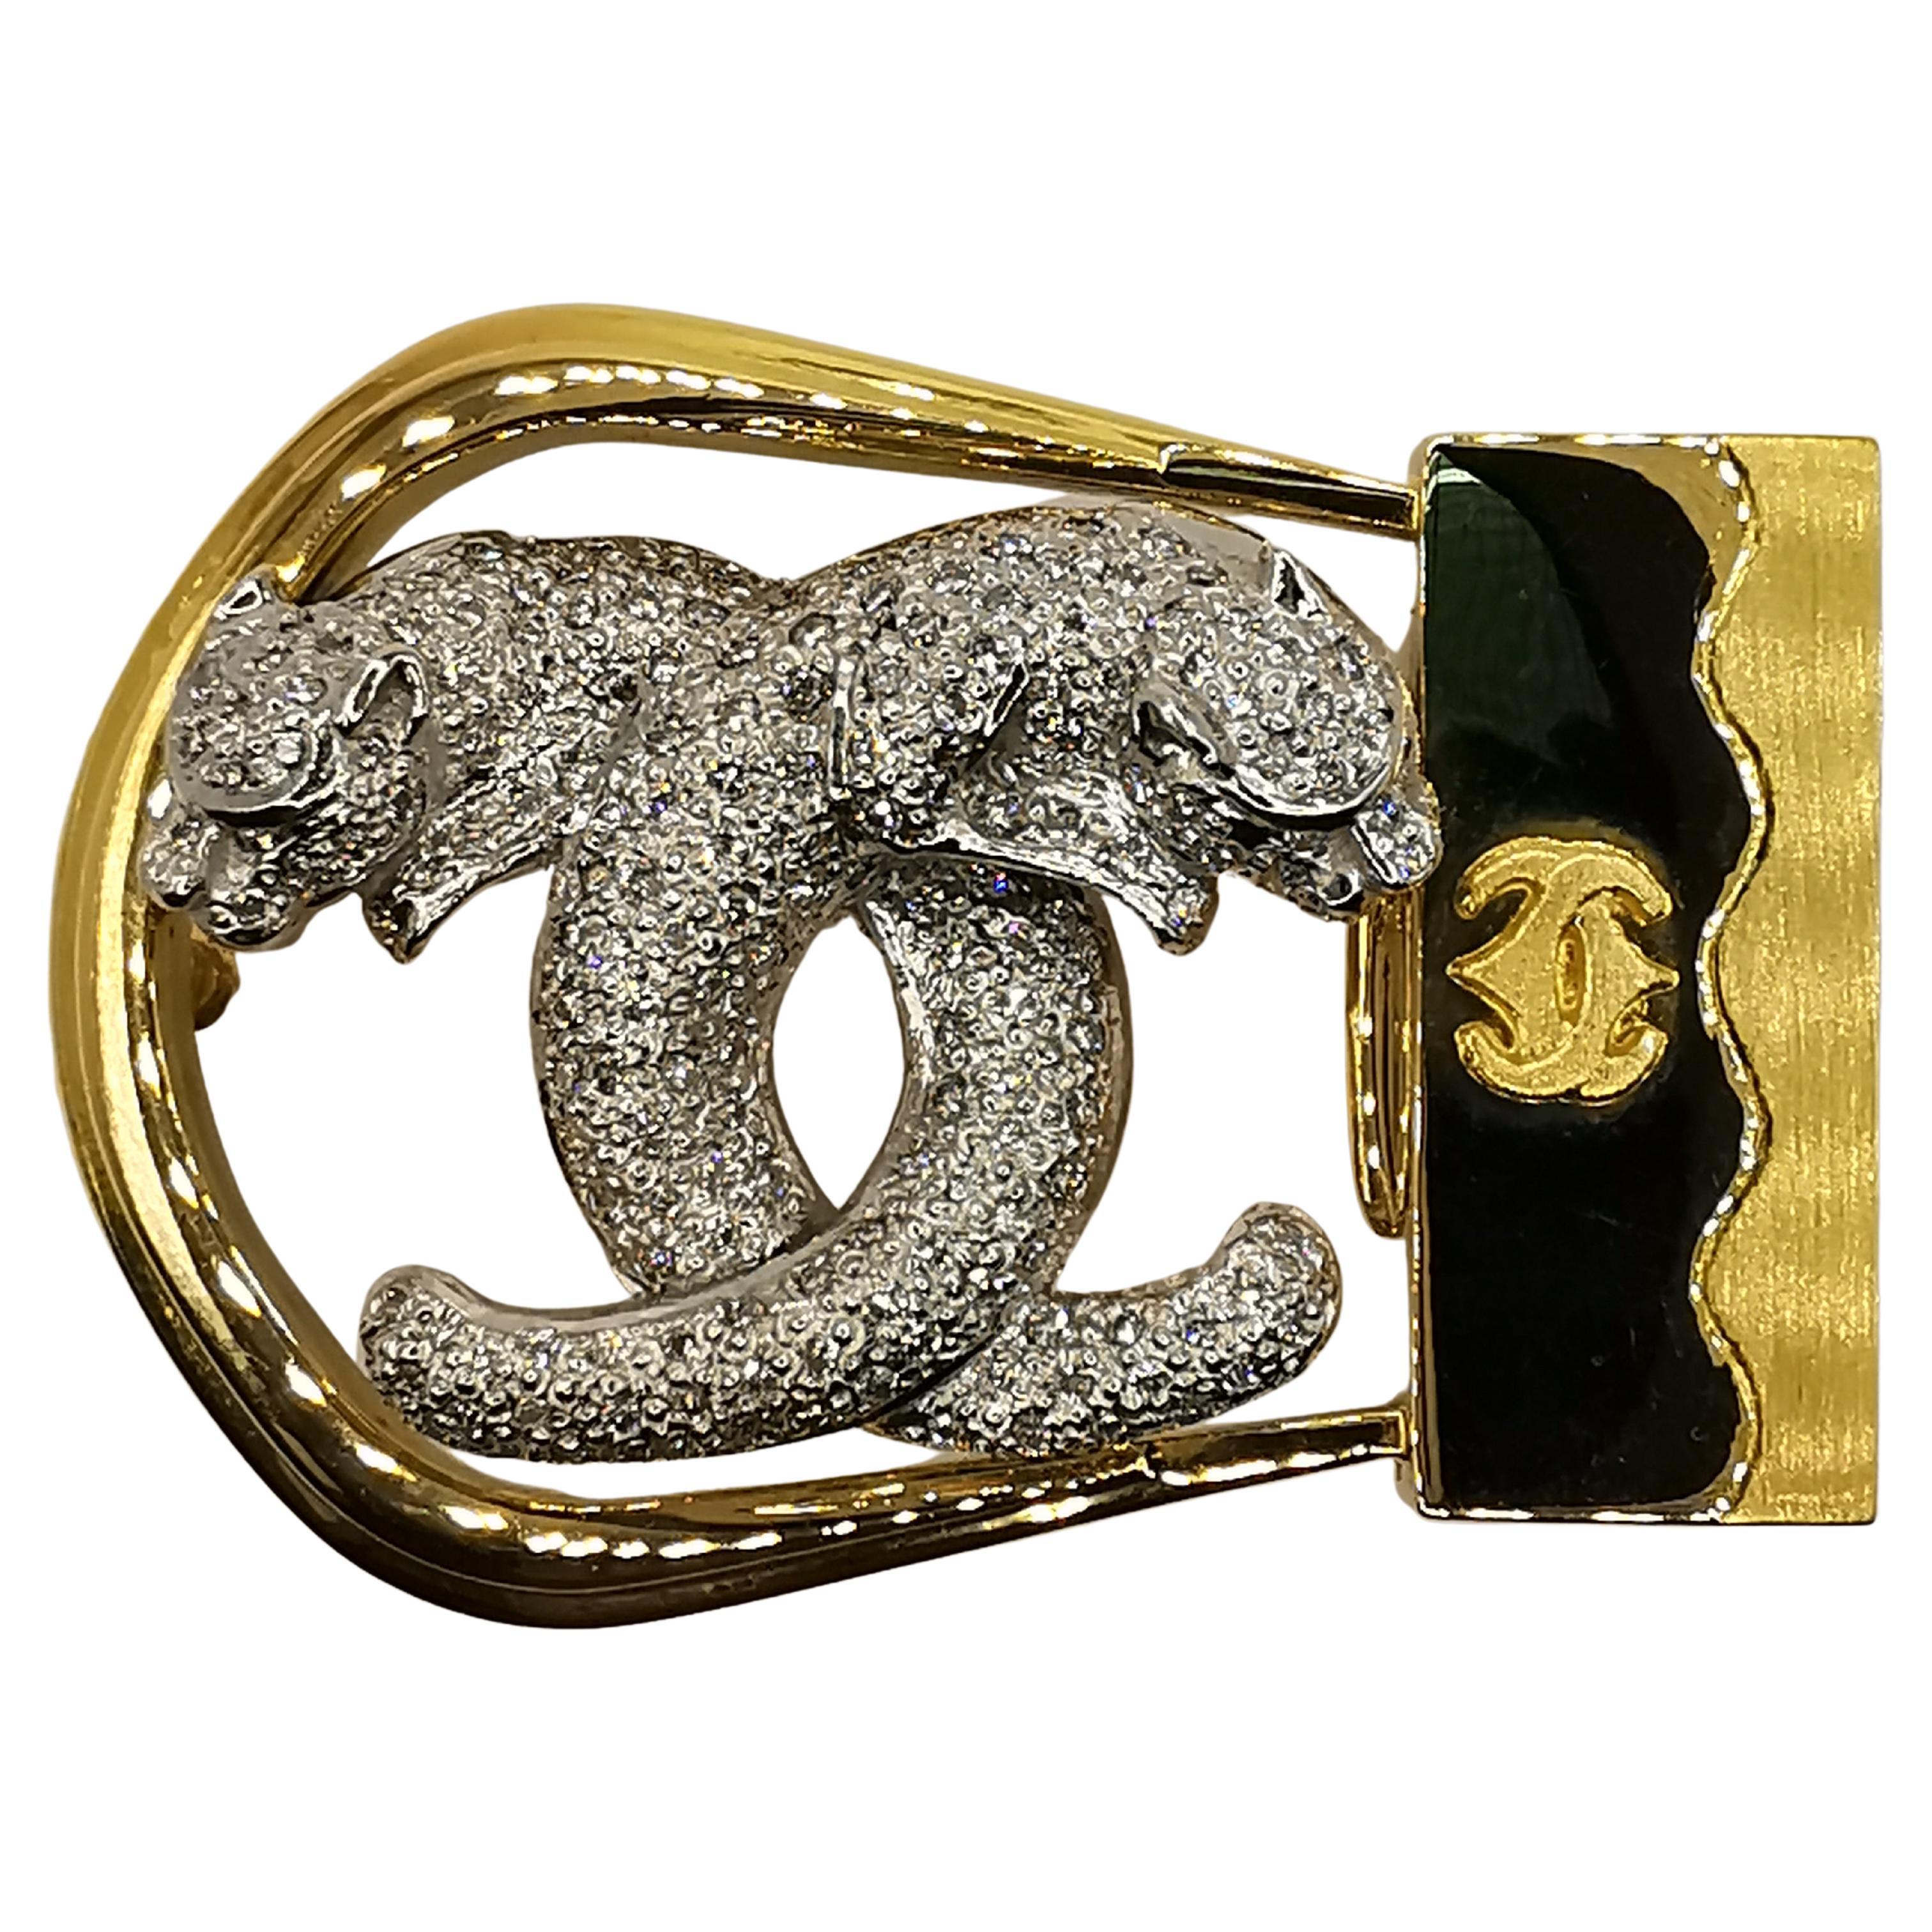 Double Jaguar 1.74 Carat Diamond Belt Buckle in 18k Yellow and White Gold For Sale